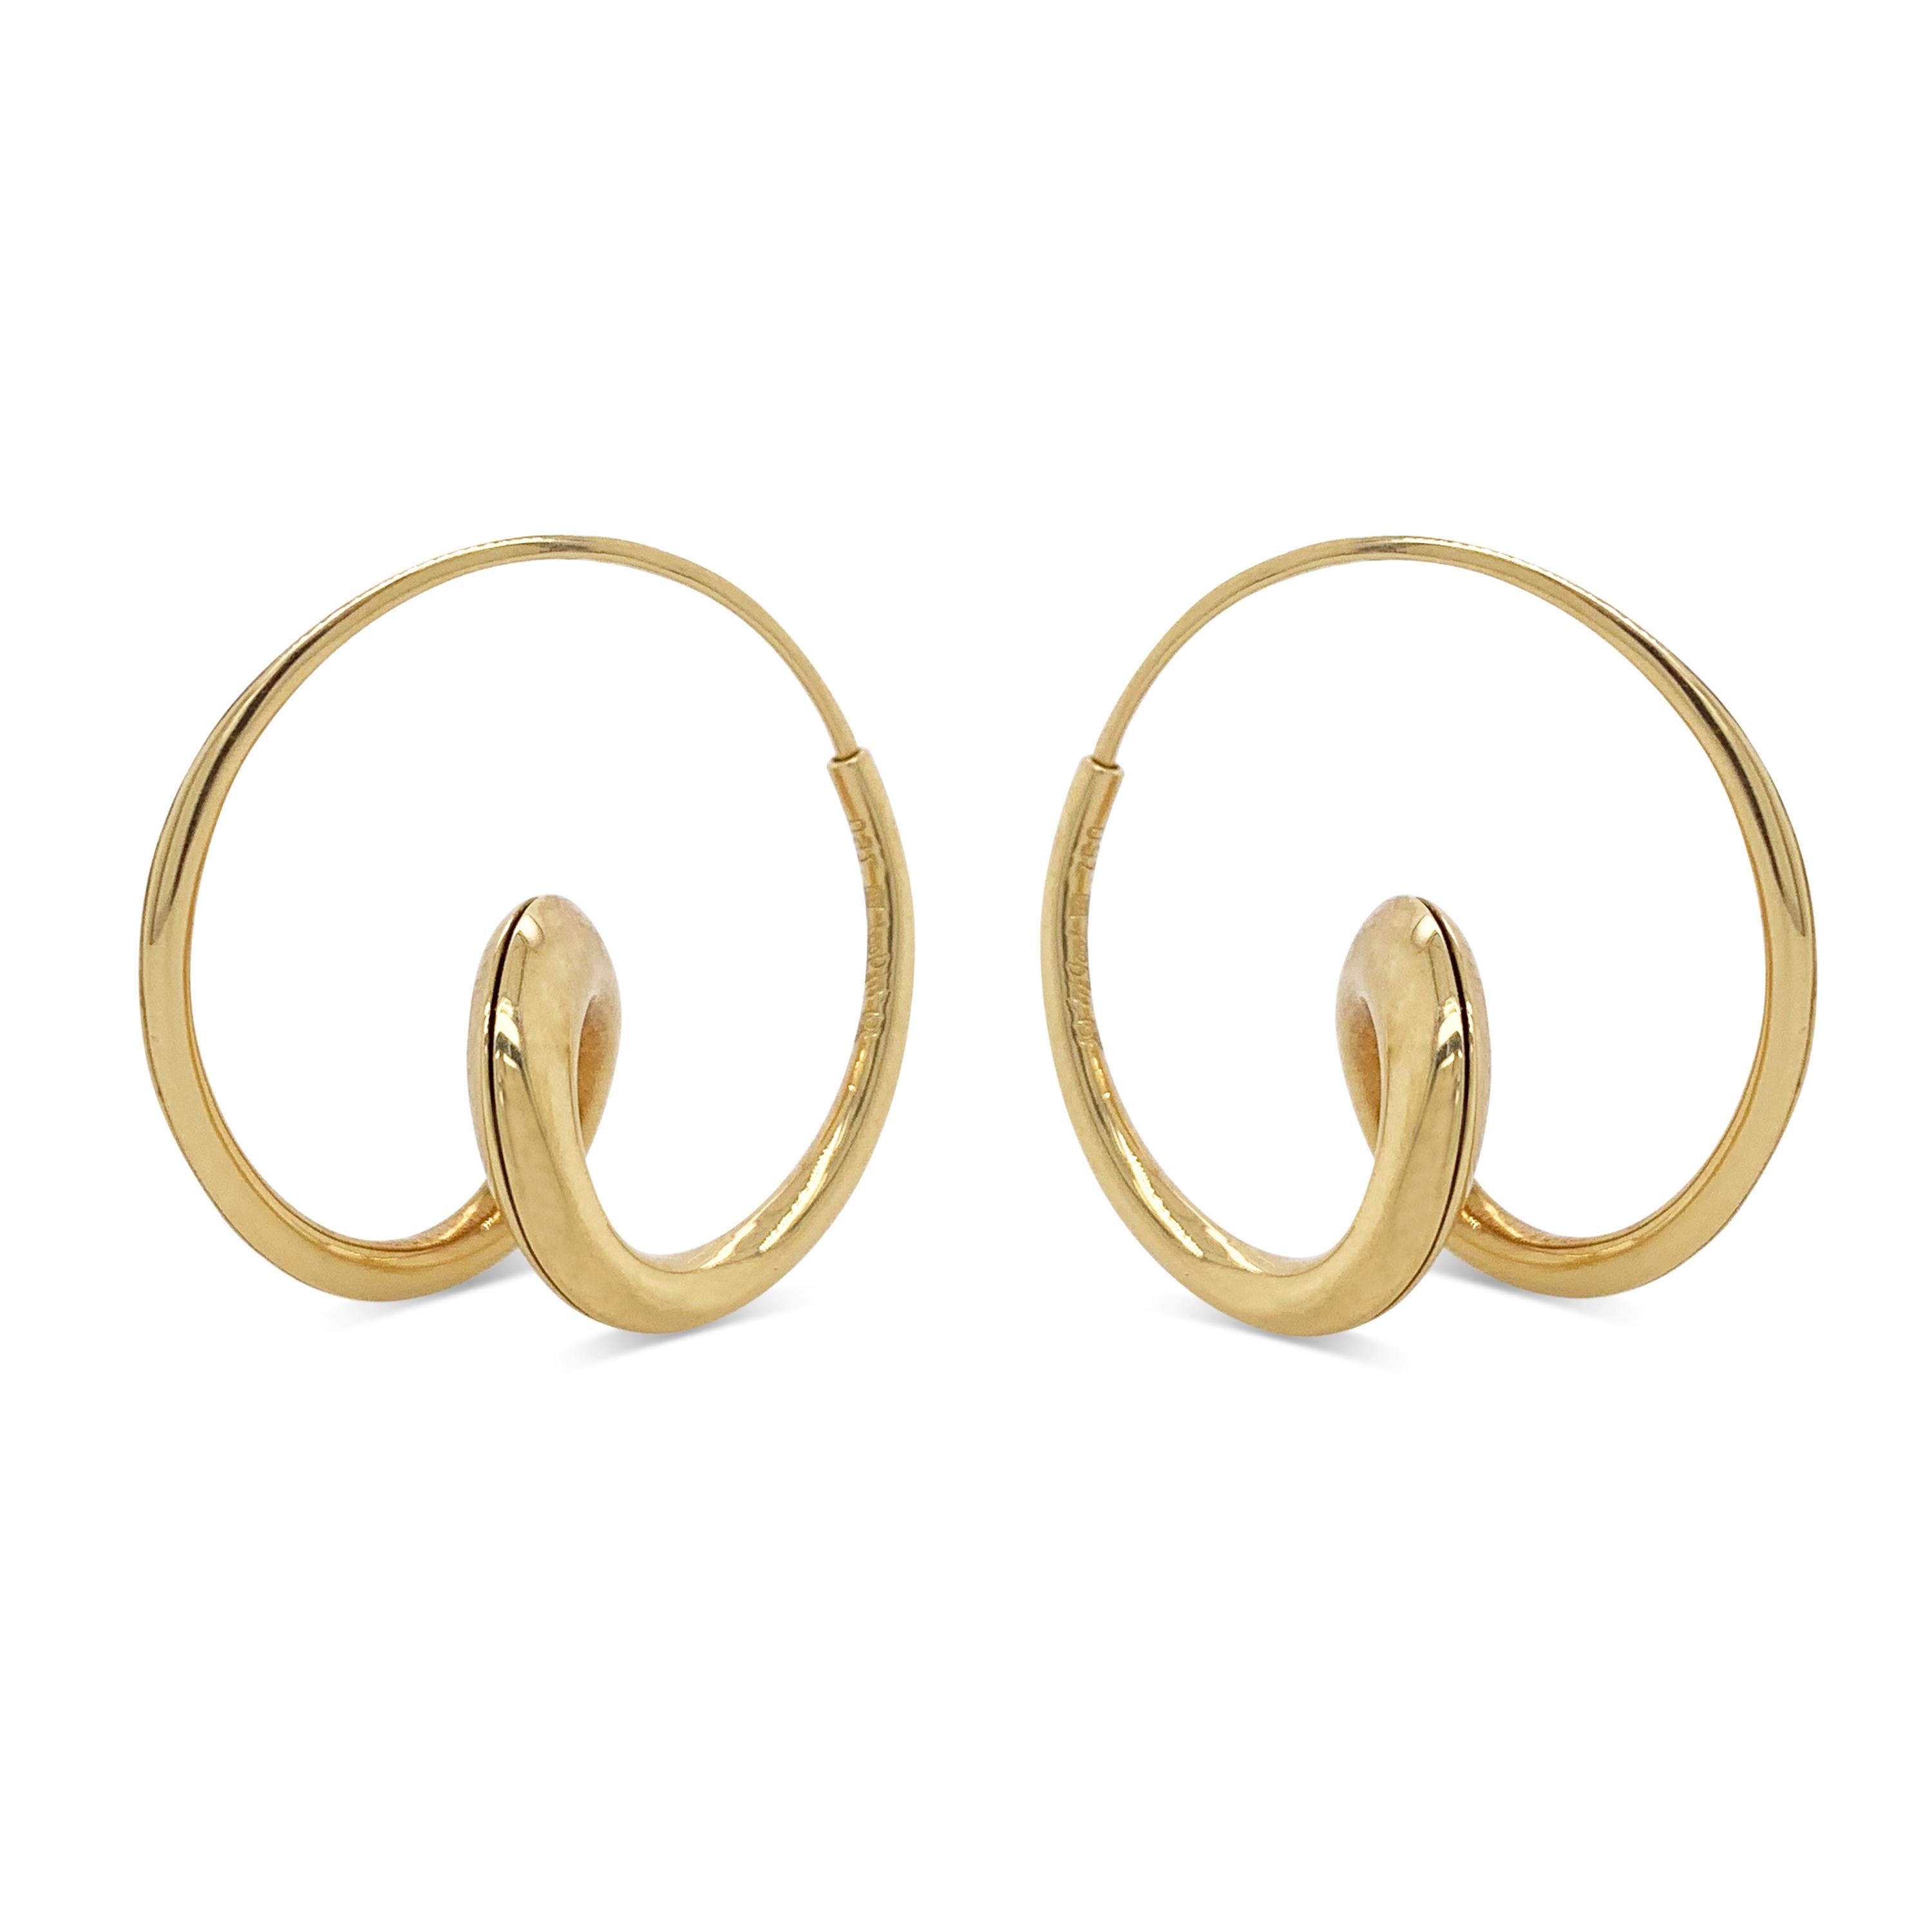 Michael Good baroque twisted hoop earrings in 18k yellow gold.

Approximately 1